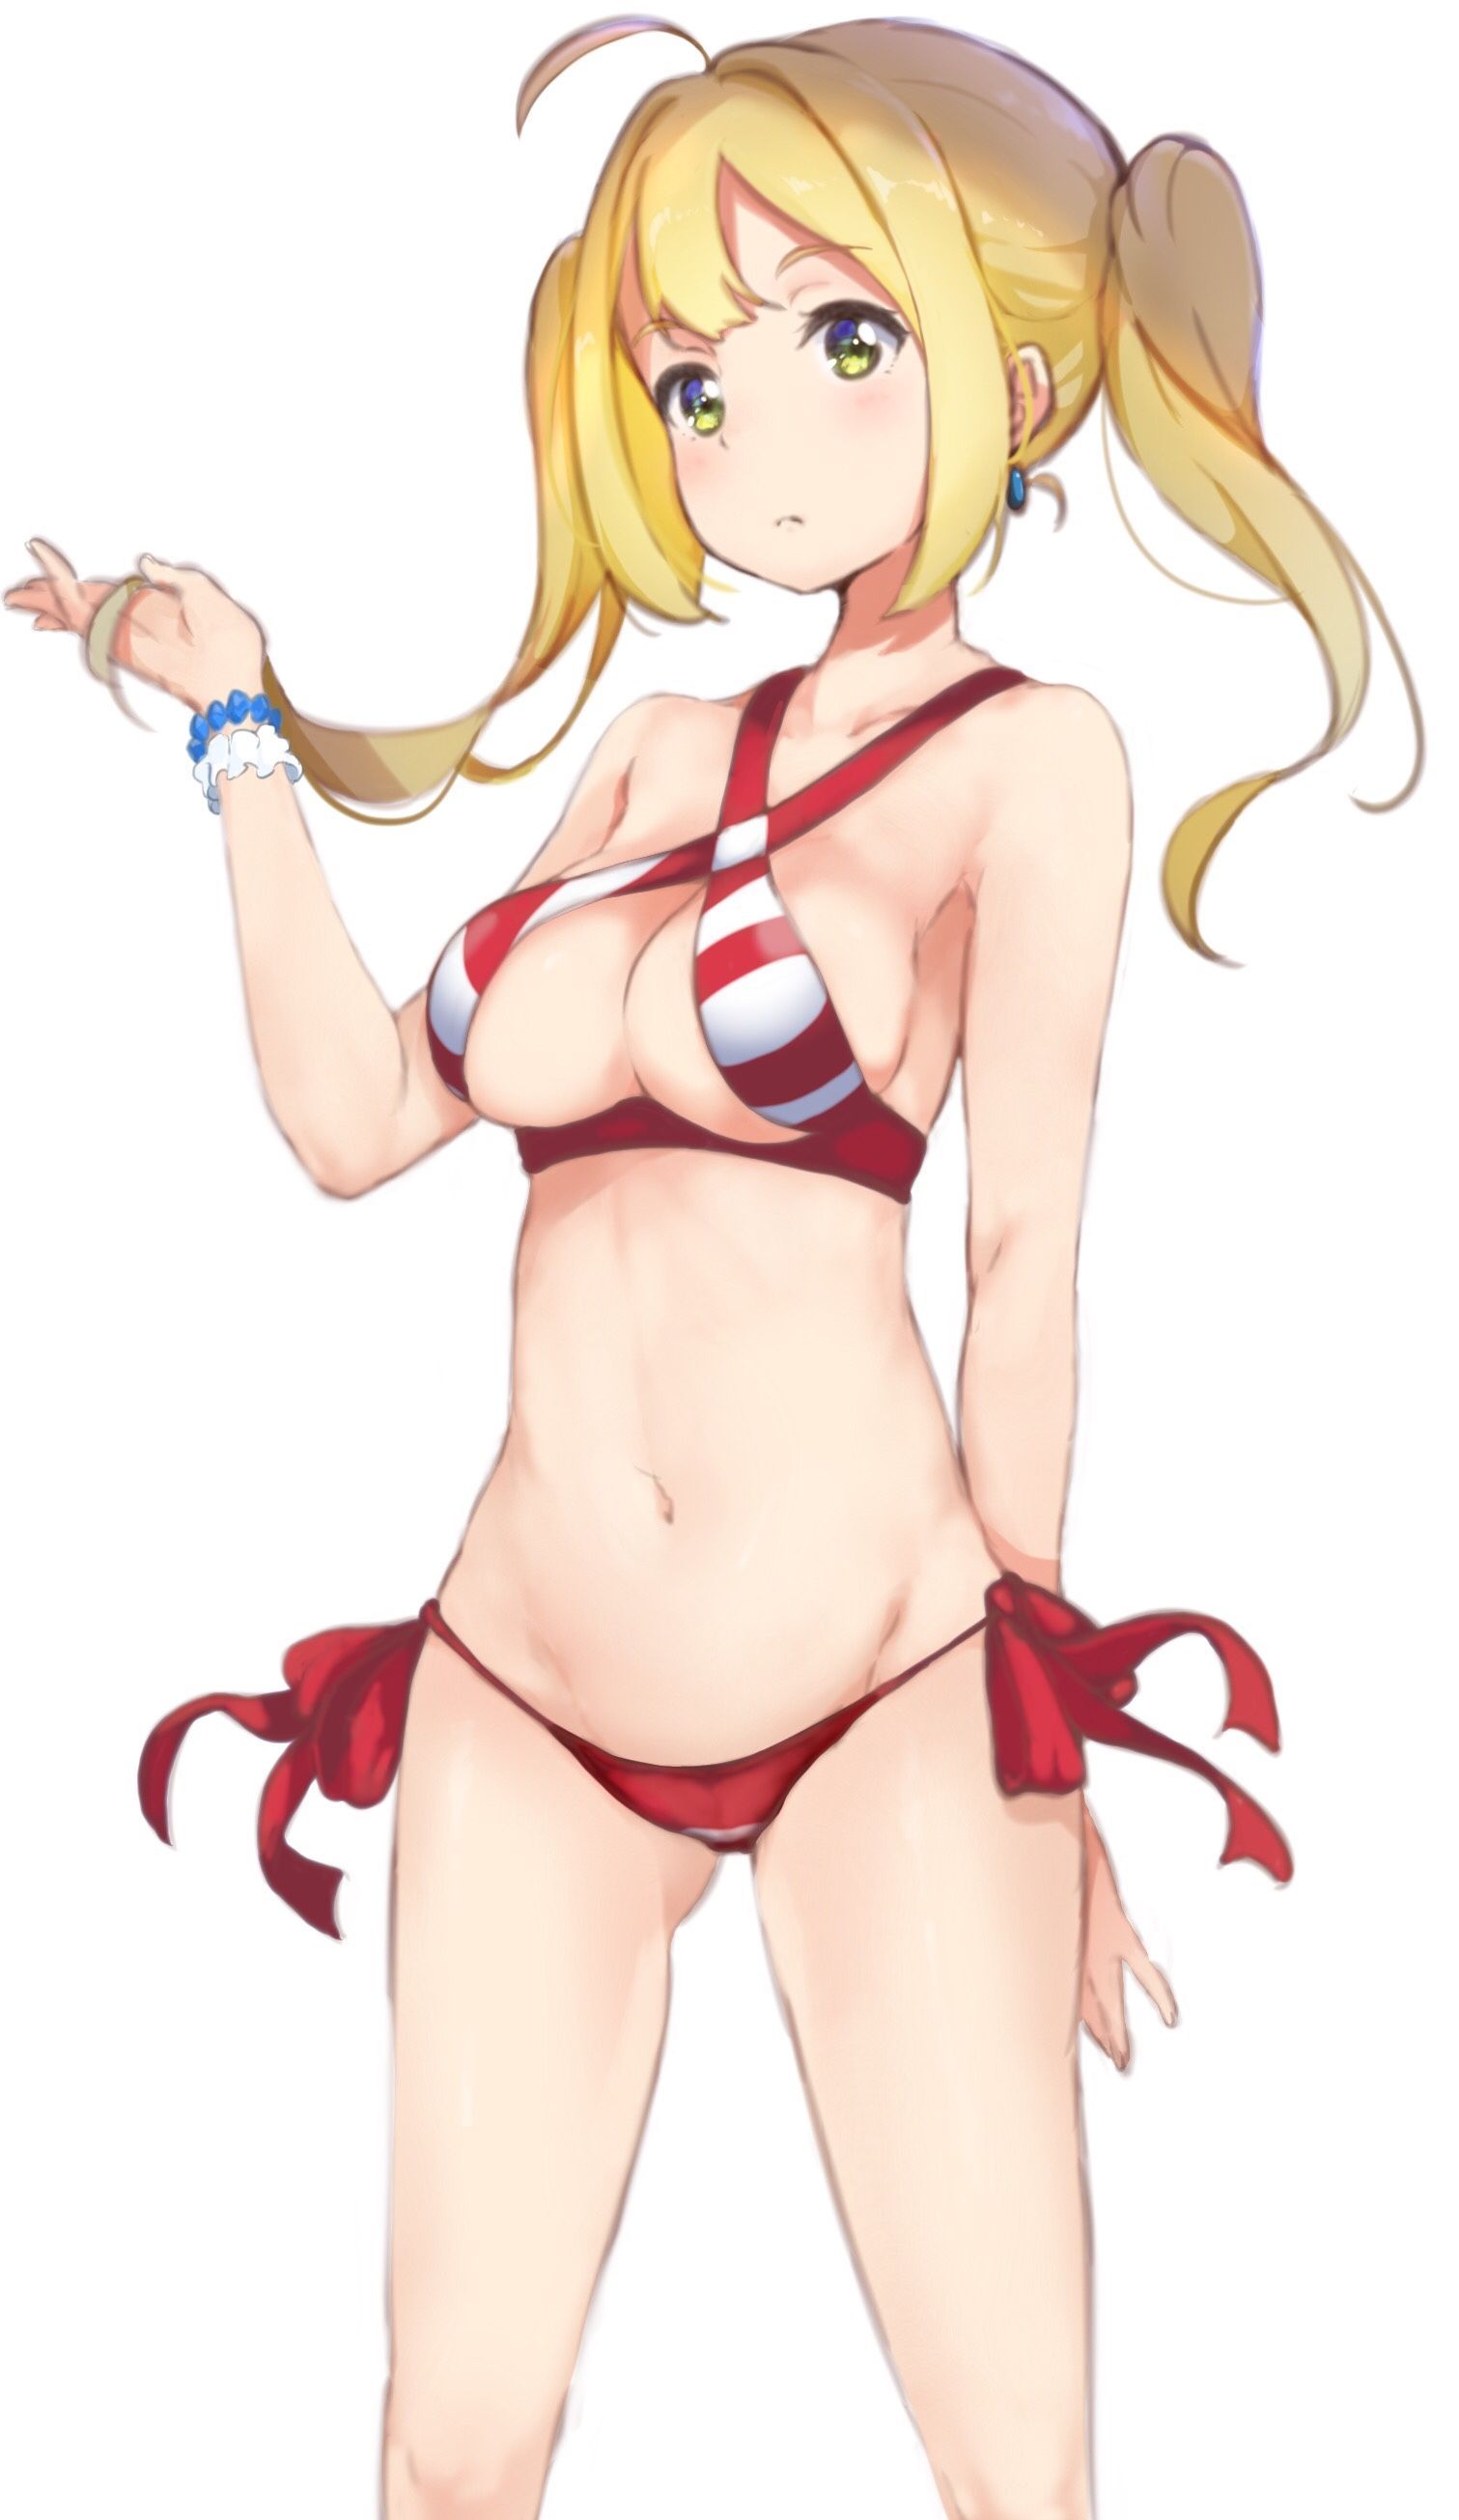 【Secondary】 Fate/Grand Order (Fate/EXTRA-CCC), Nero Claudius' love images summary! No.16 [20 sheets] 3